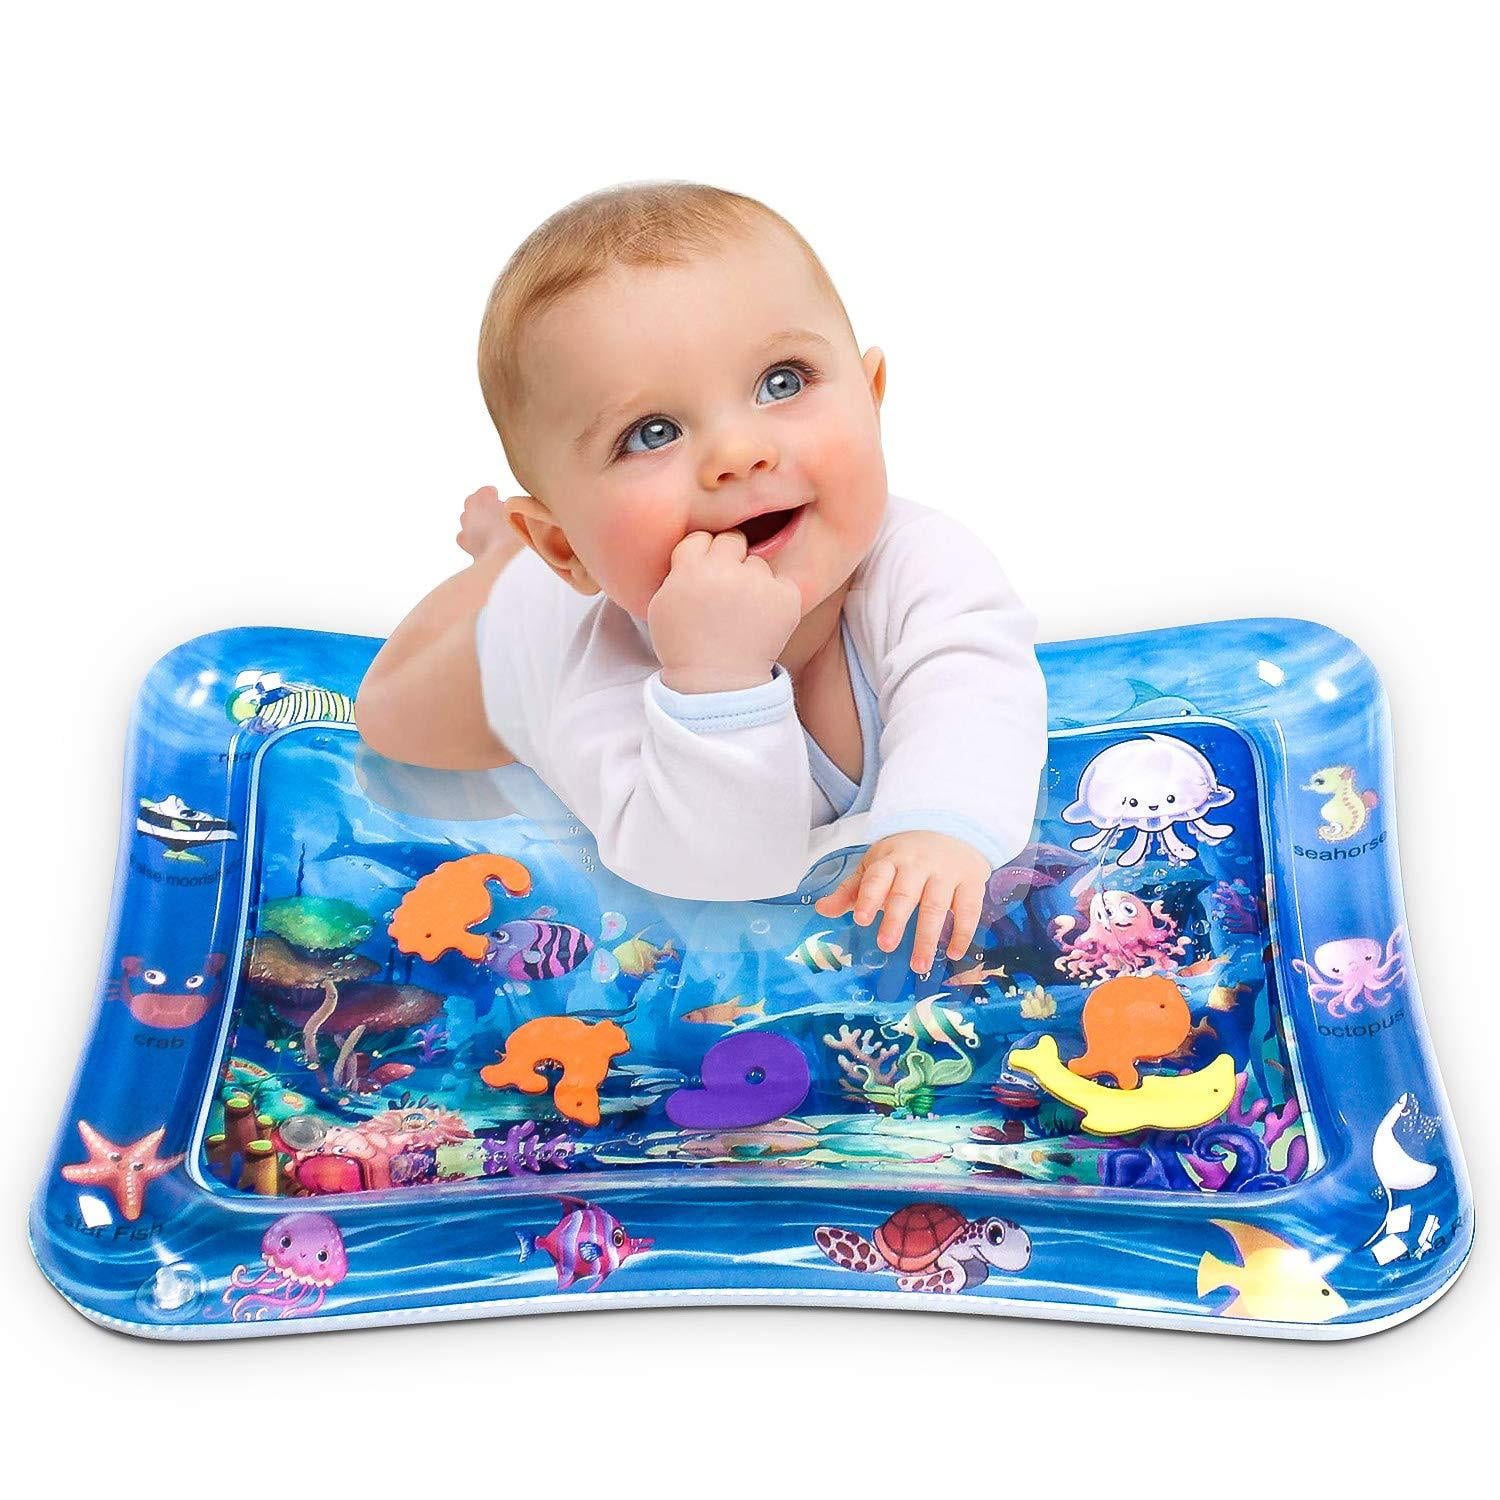 Inflatable Water Play Mat Infants Toddlers Fun Tummy Time Play Activity Center 